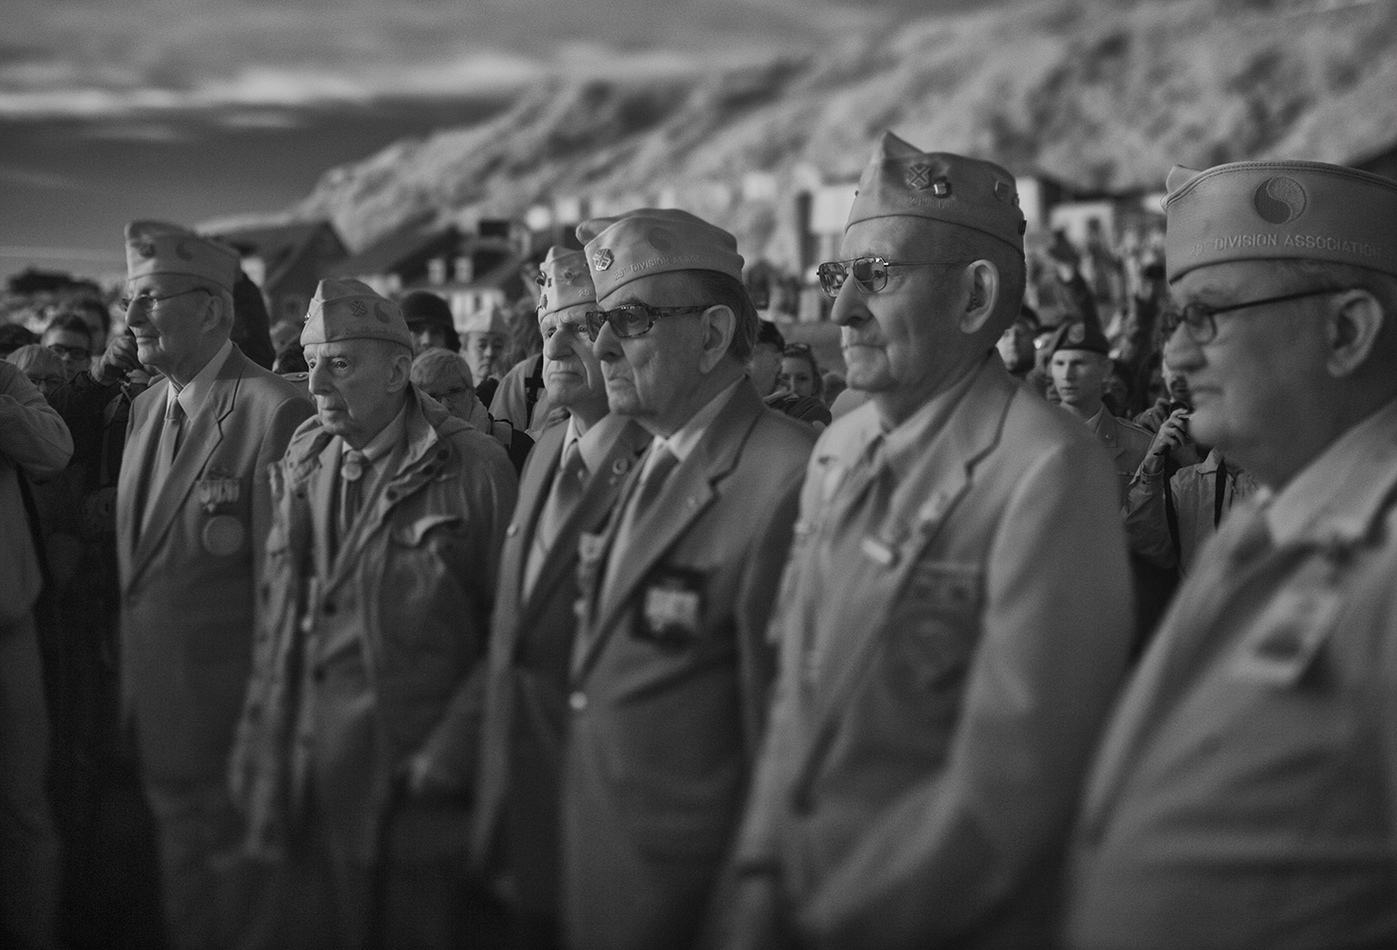 Members of the 29th Division gather at Dog/Red on Omaha beach, 0700, 70 years after D-Day to salute their fallen comrades : D-Day: the Men, the Beaches : David Burnett | Photographer